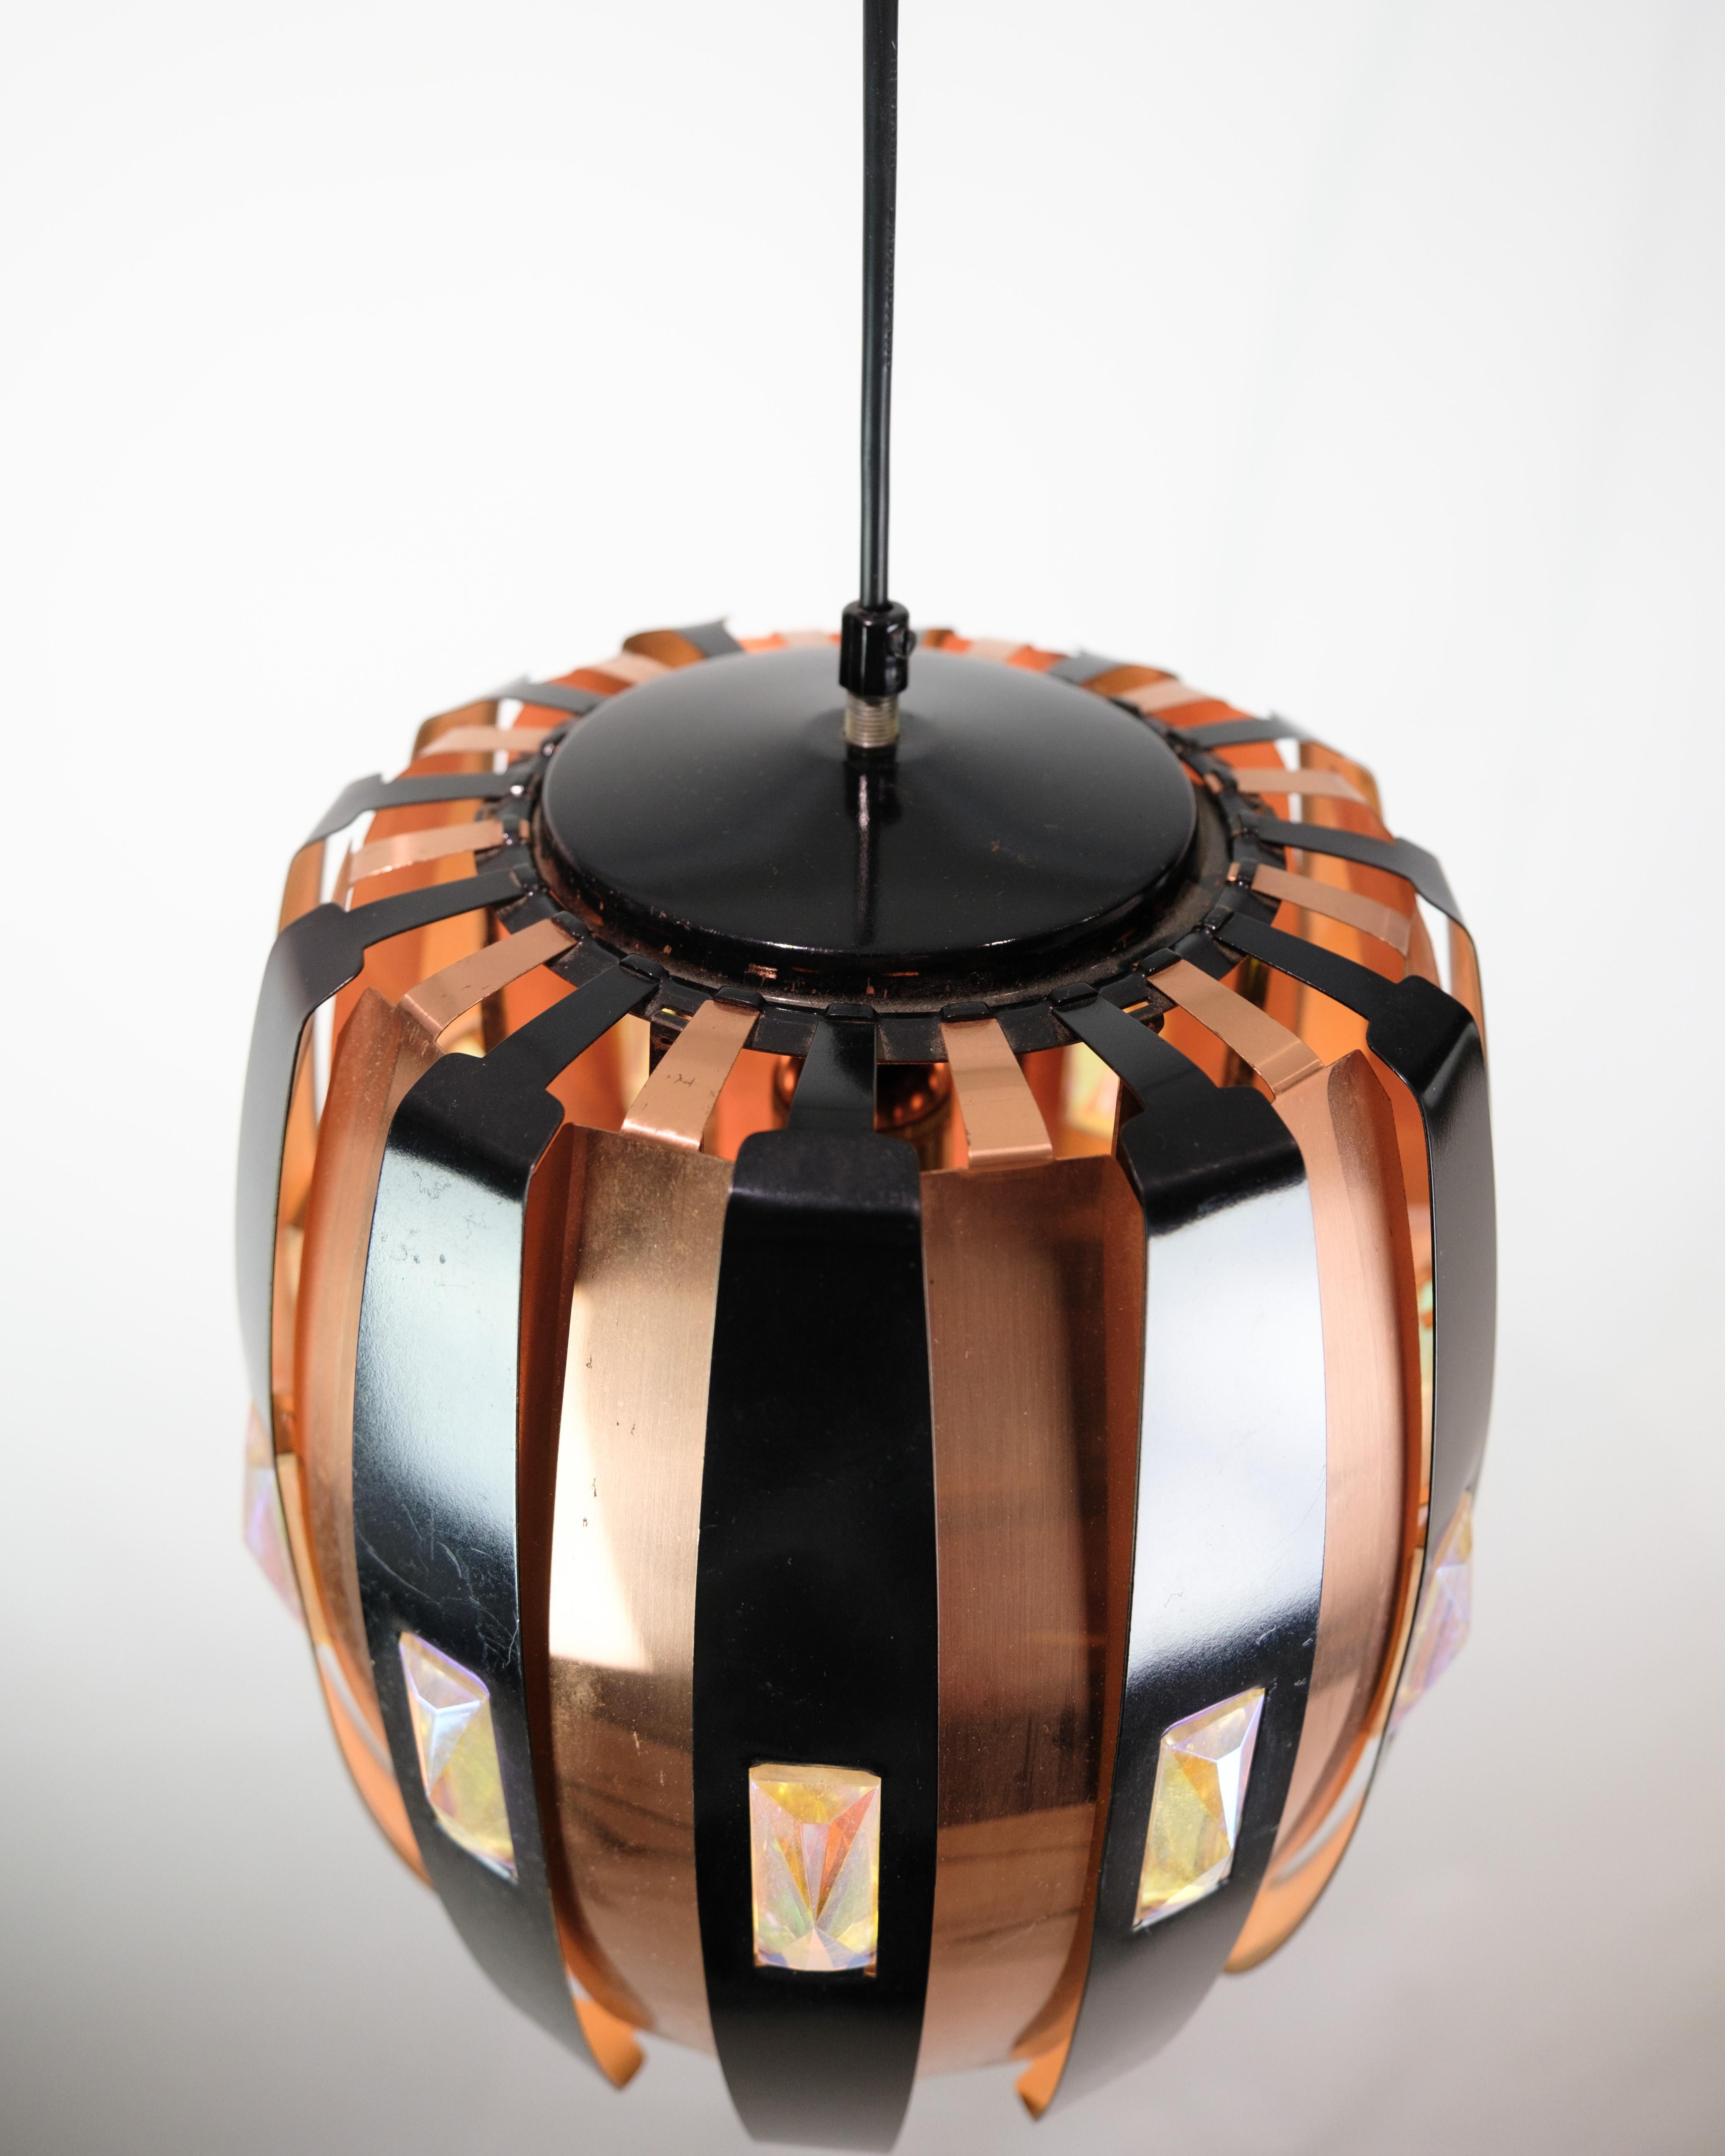 The ceiling lamp in copper, decorated with crystals, created by Werner Schou and produced by Coronell Elektro Denmark in 1970, is a magnificent example of lighting design from this era. Combining the warm shades of copper with the luxurious shine of